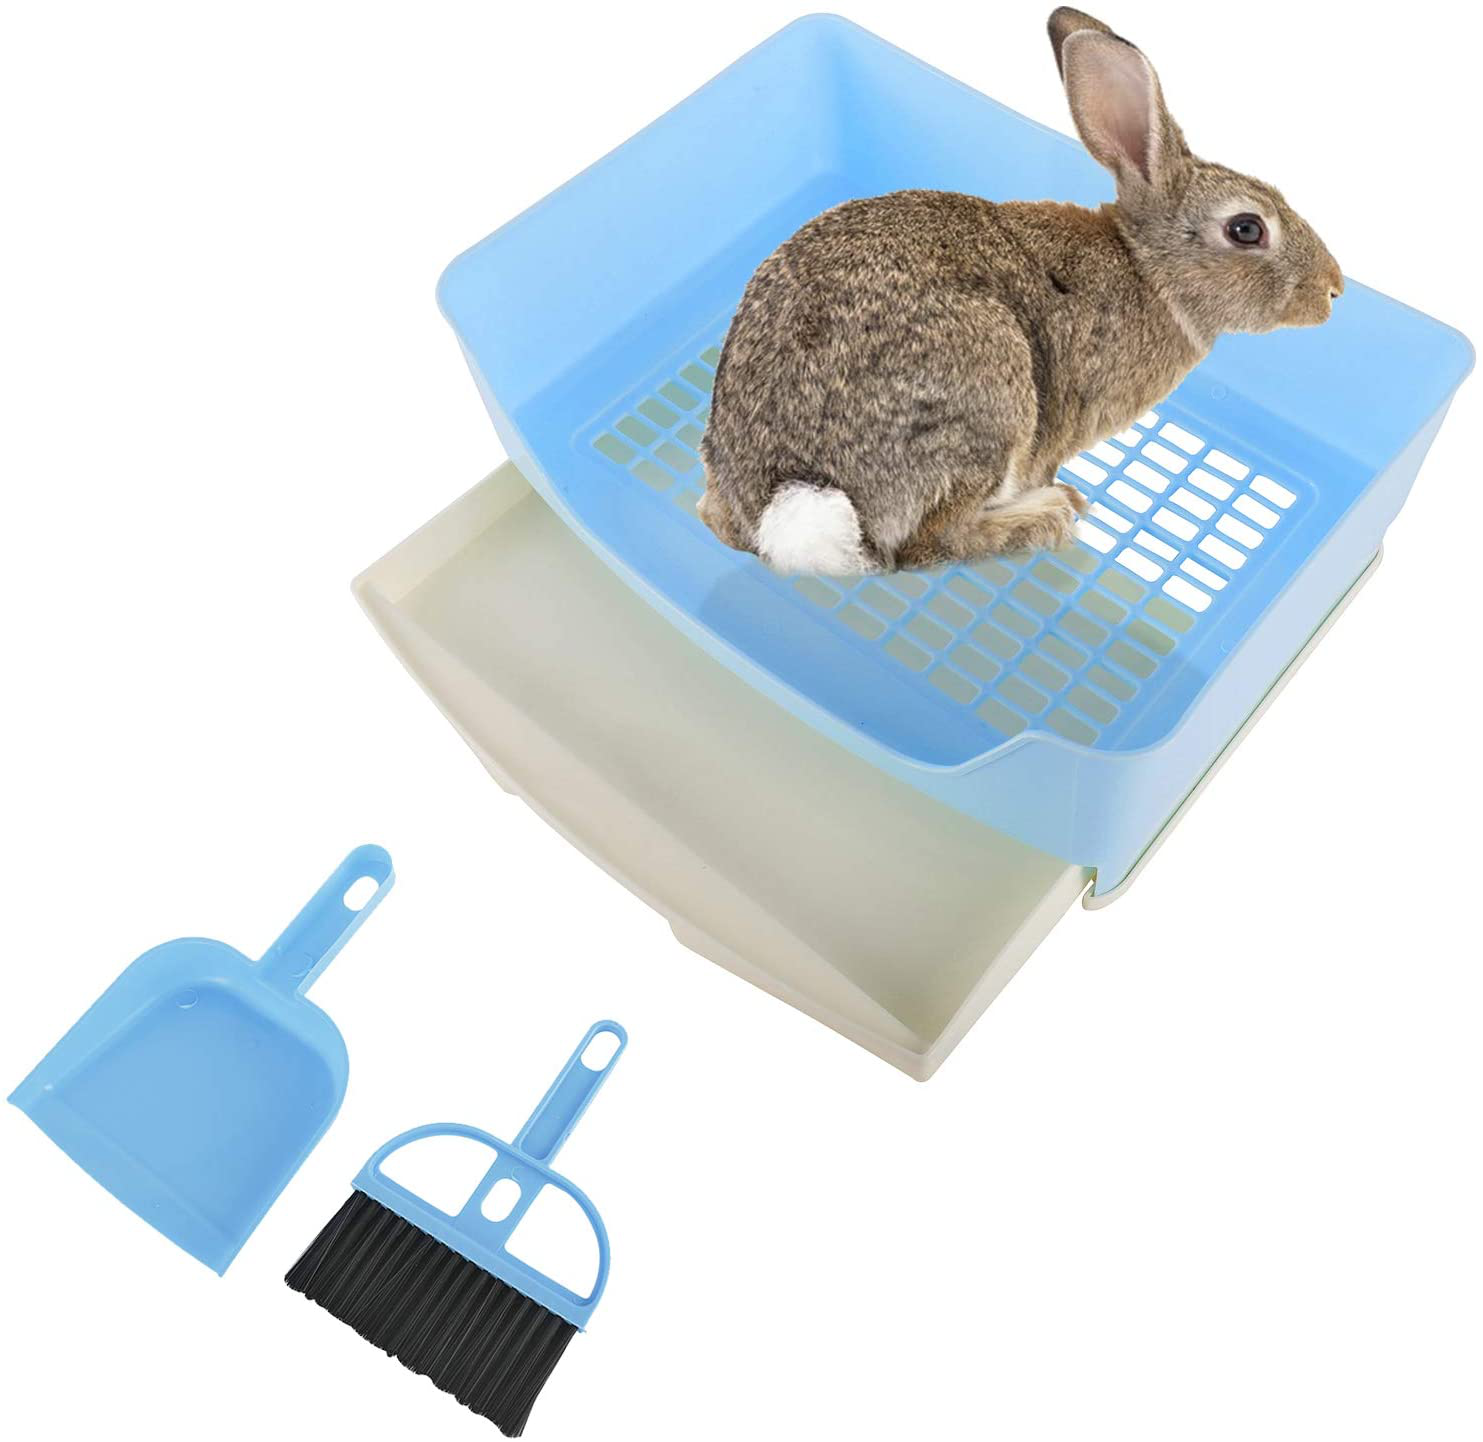 Sparkfire Large Rabbit Litter Box Trainer 16" × 11.8", Potty Corner Toilet with Drawer Bigger Pet Pan for Adult Hamster, Guinea Pig, Chinchilla, Bunny and Other Small Animals